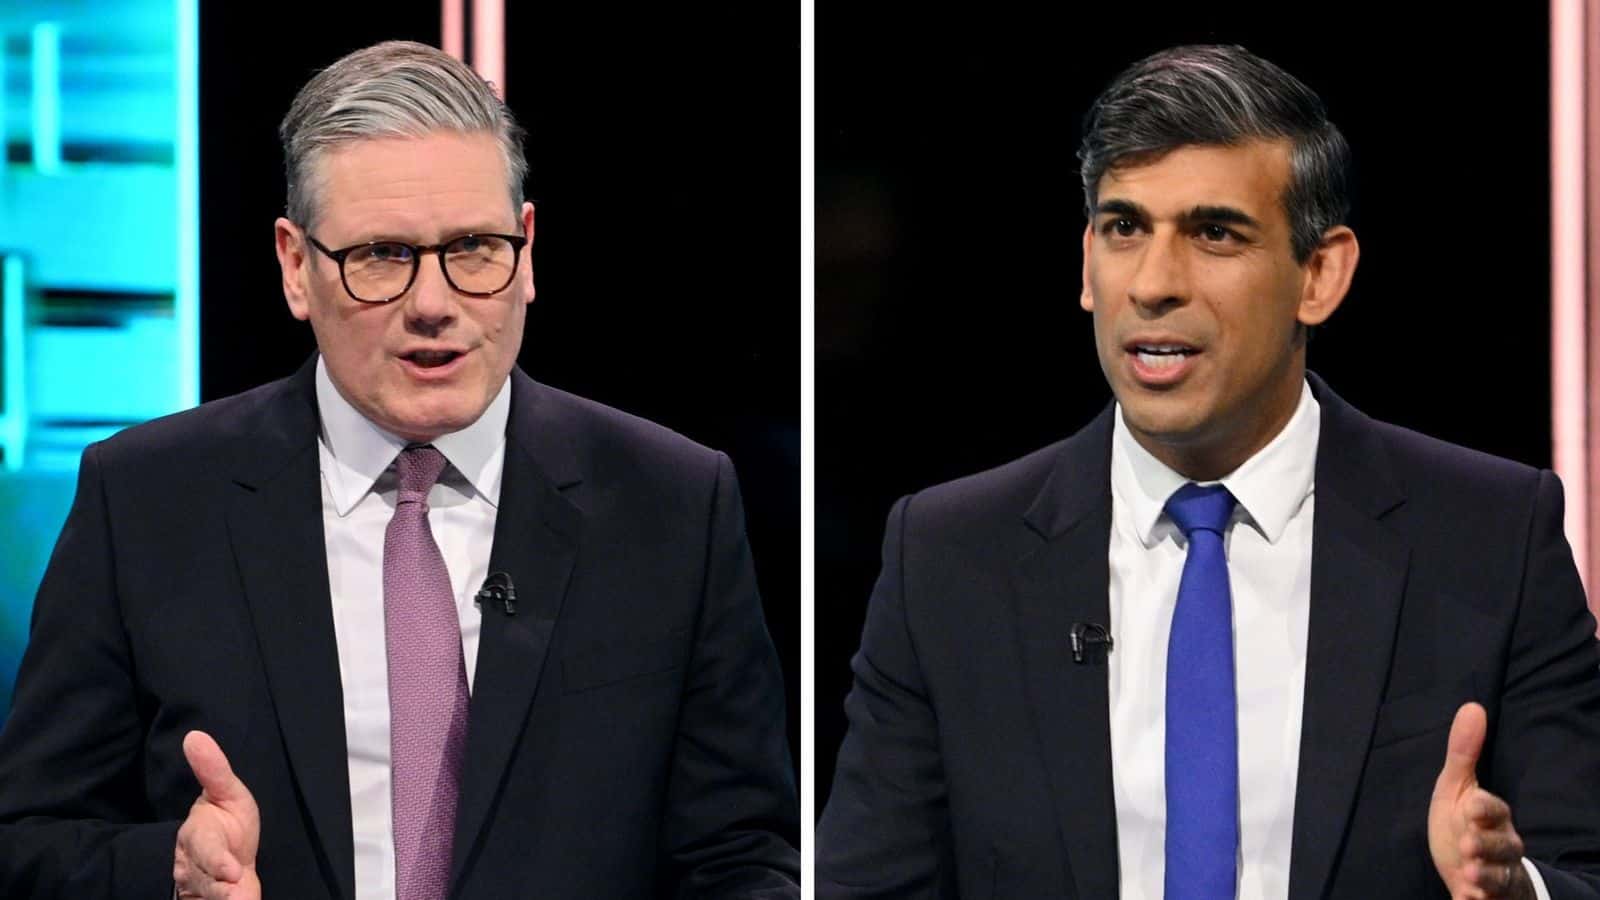 Key moments from the first Sunak-Starmer debate